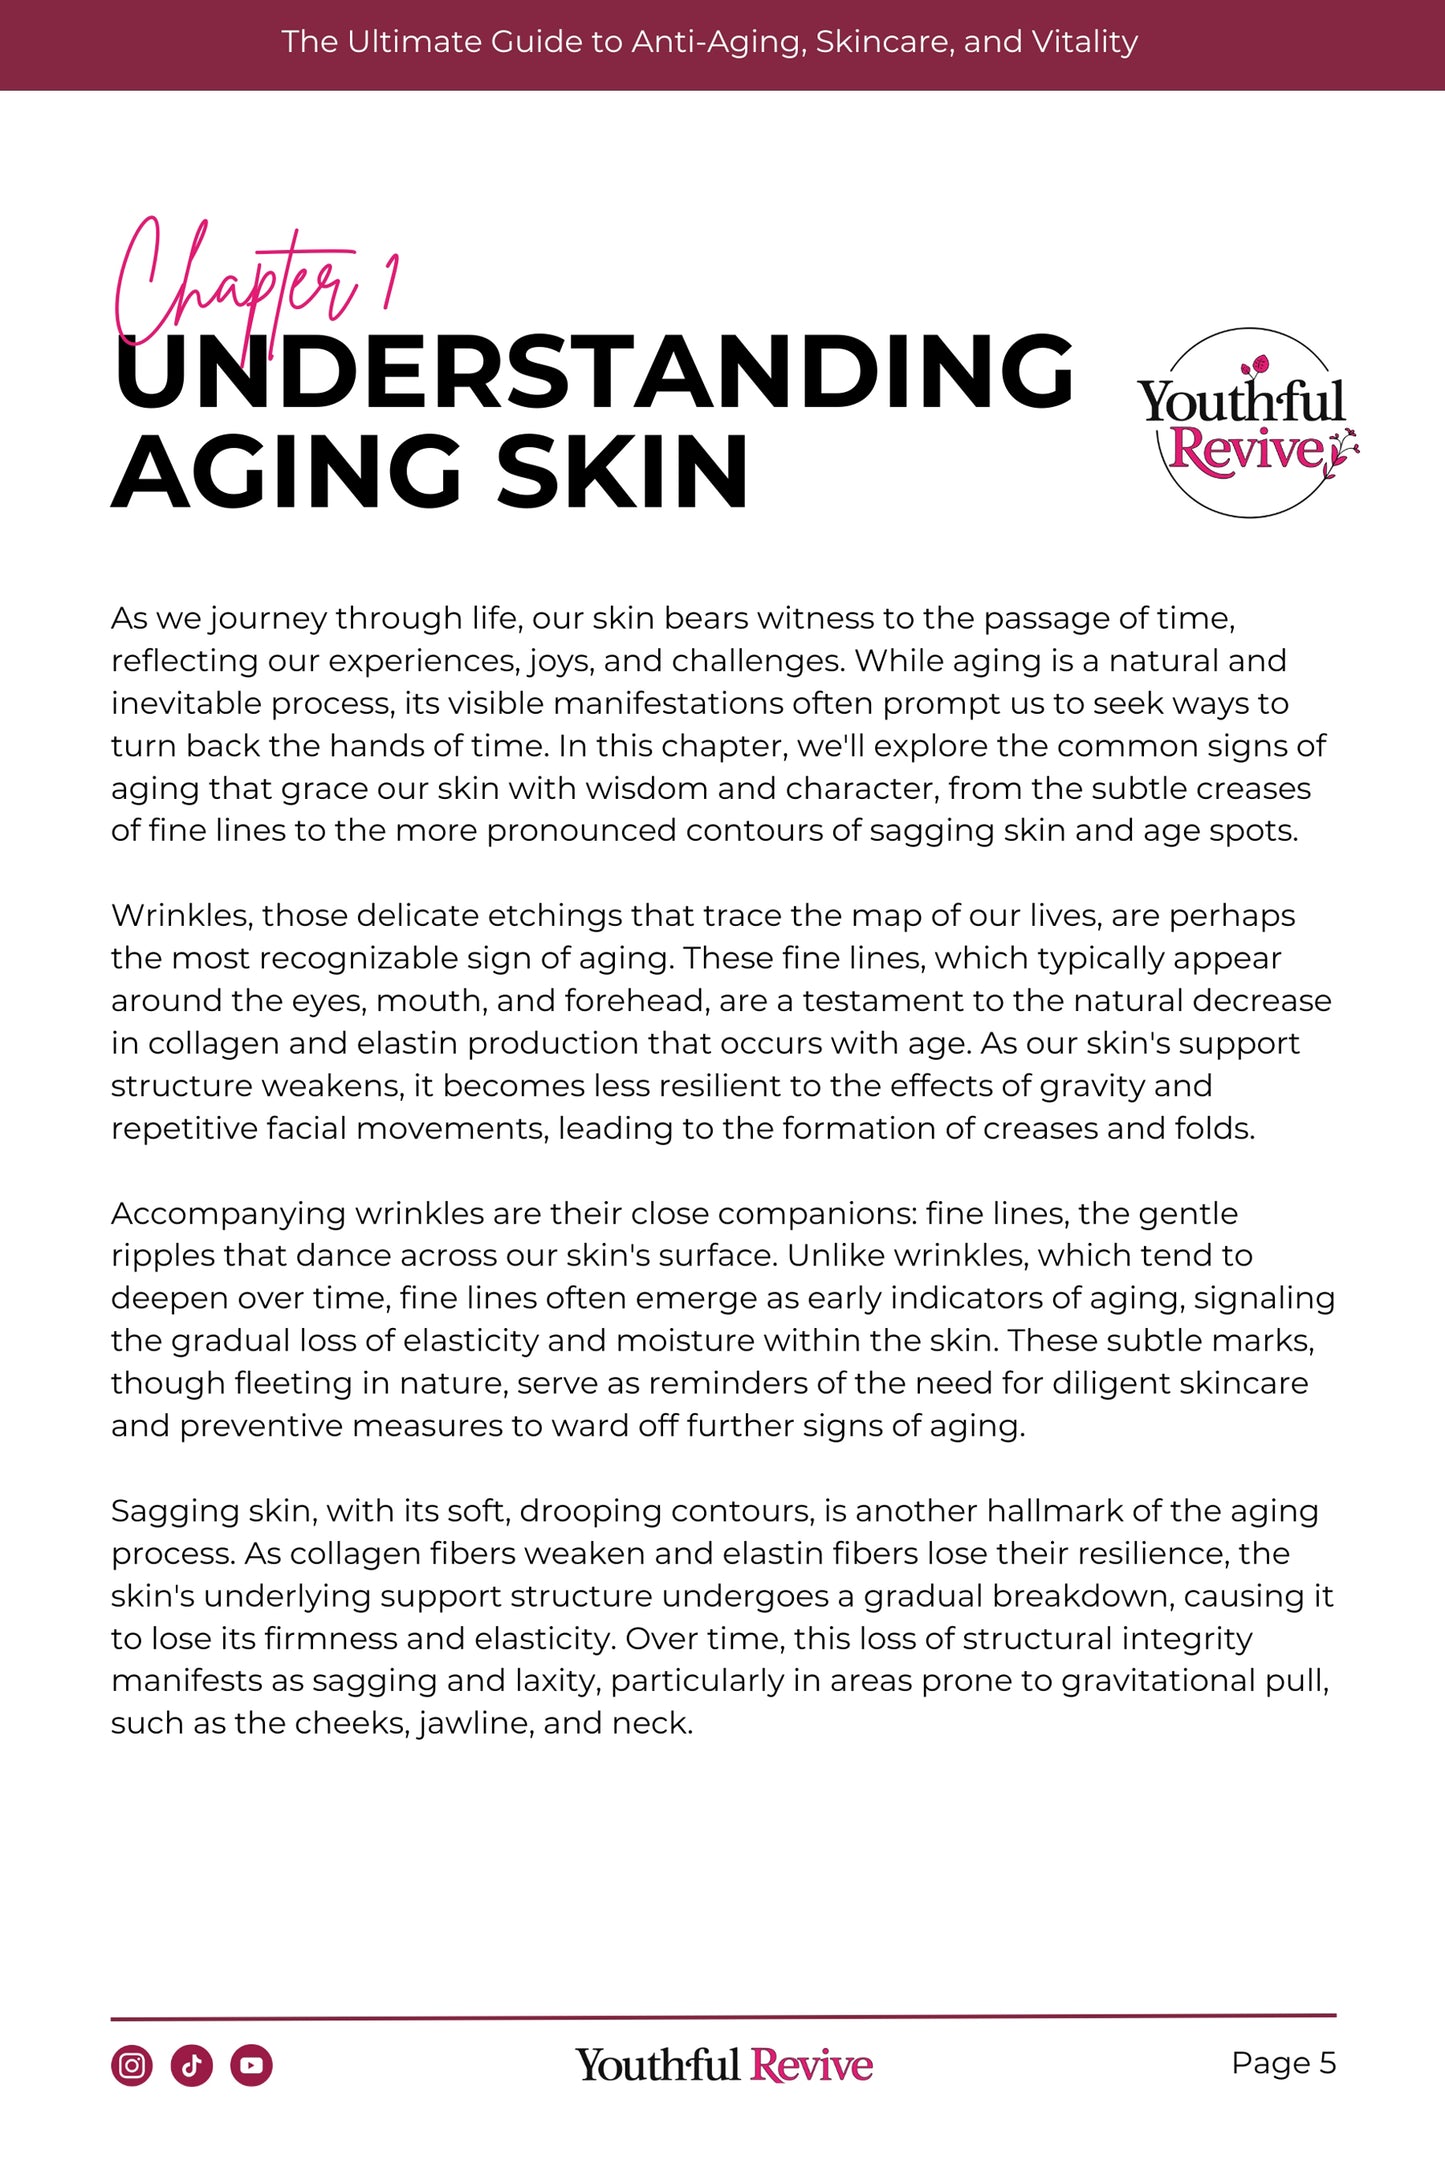 Youthful Revive: The Ultimate Guide To Anti-Aging, Skincare, And Vitality